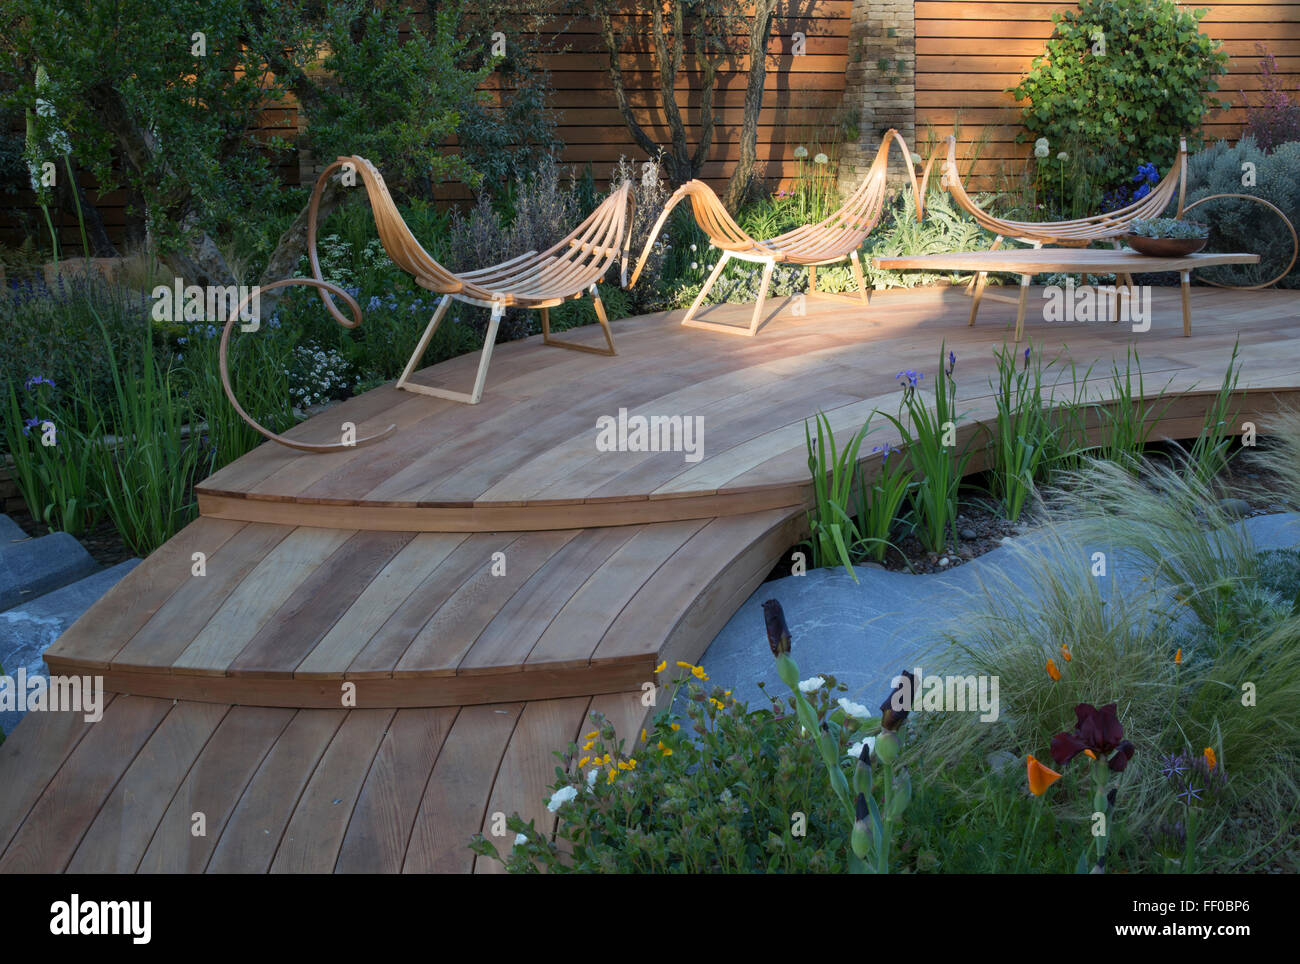 small modern spring show garden with wooden patio decking deck garden furniture seating area over water feature pond at Chelsea flower show london UK Stock Photo